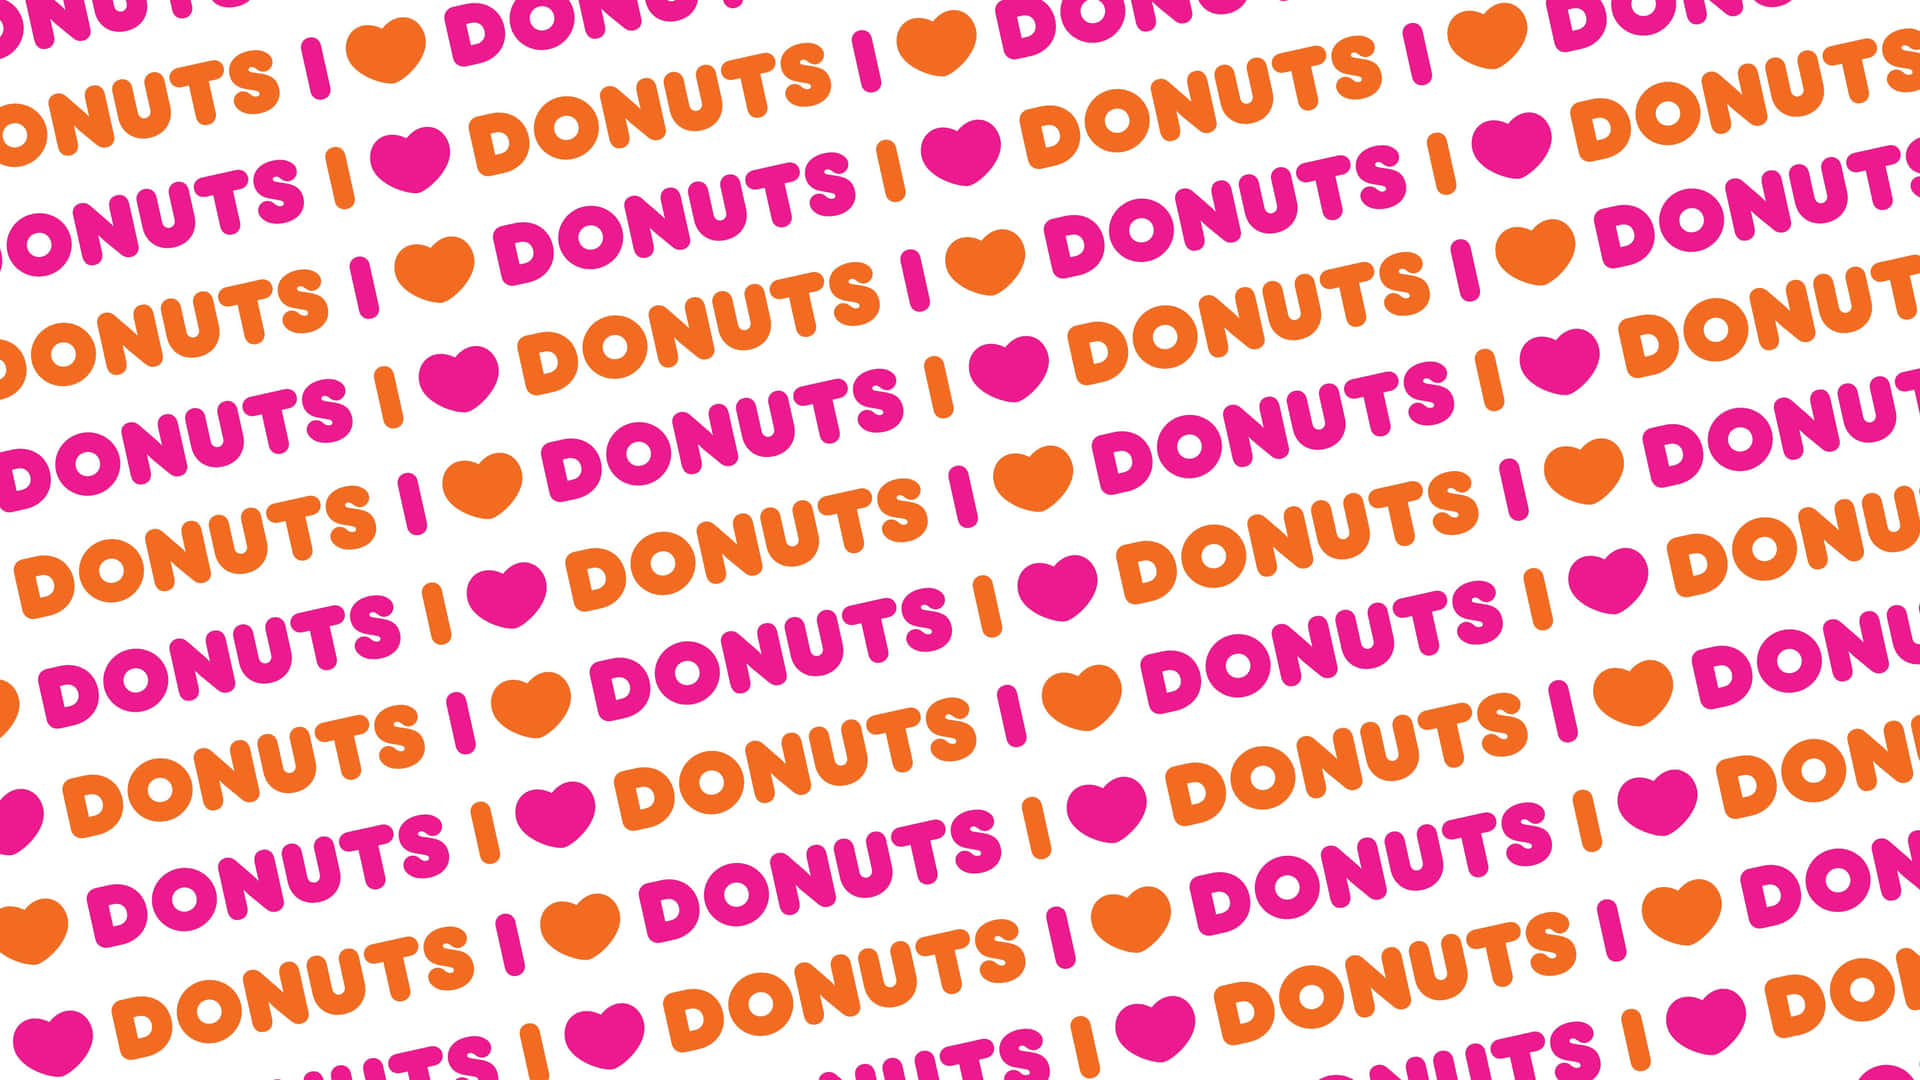 Enjoy a delicious cup of coffee with donuts from Dunkin Donuts!